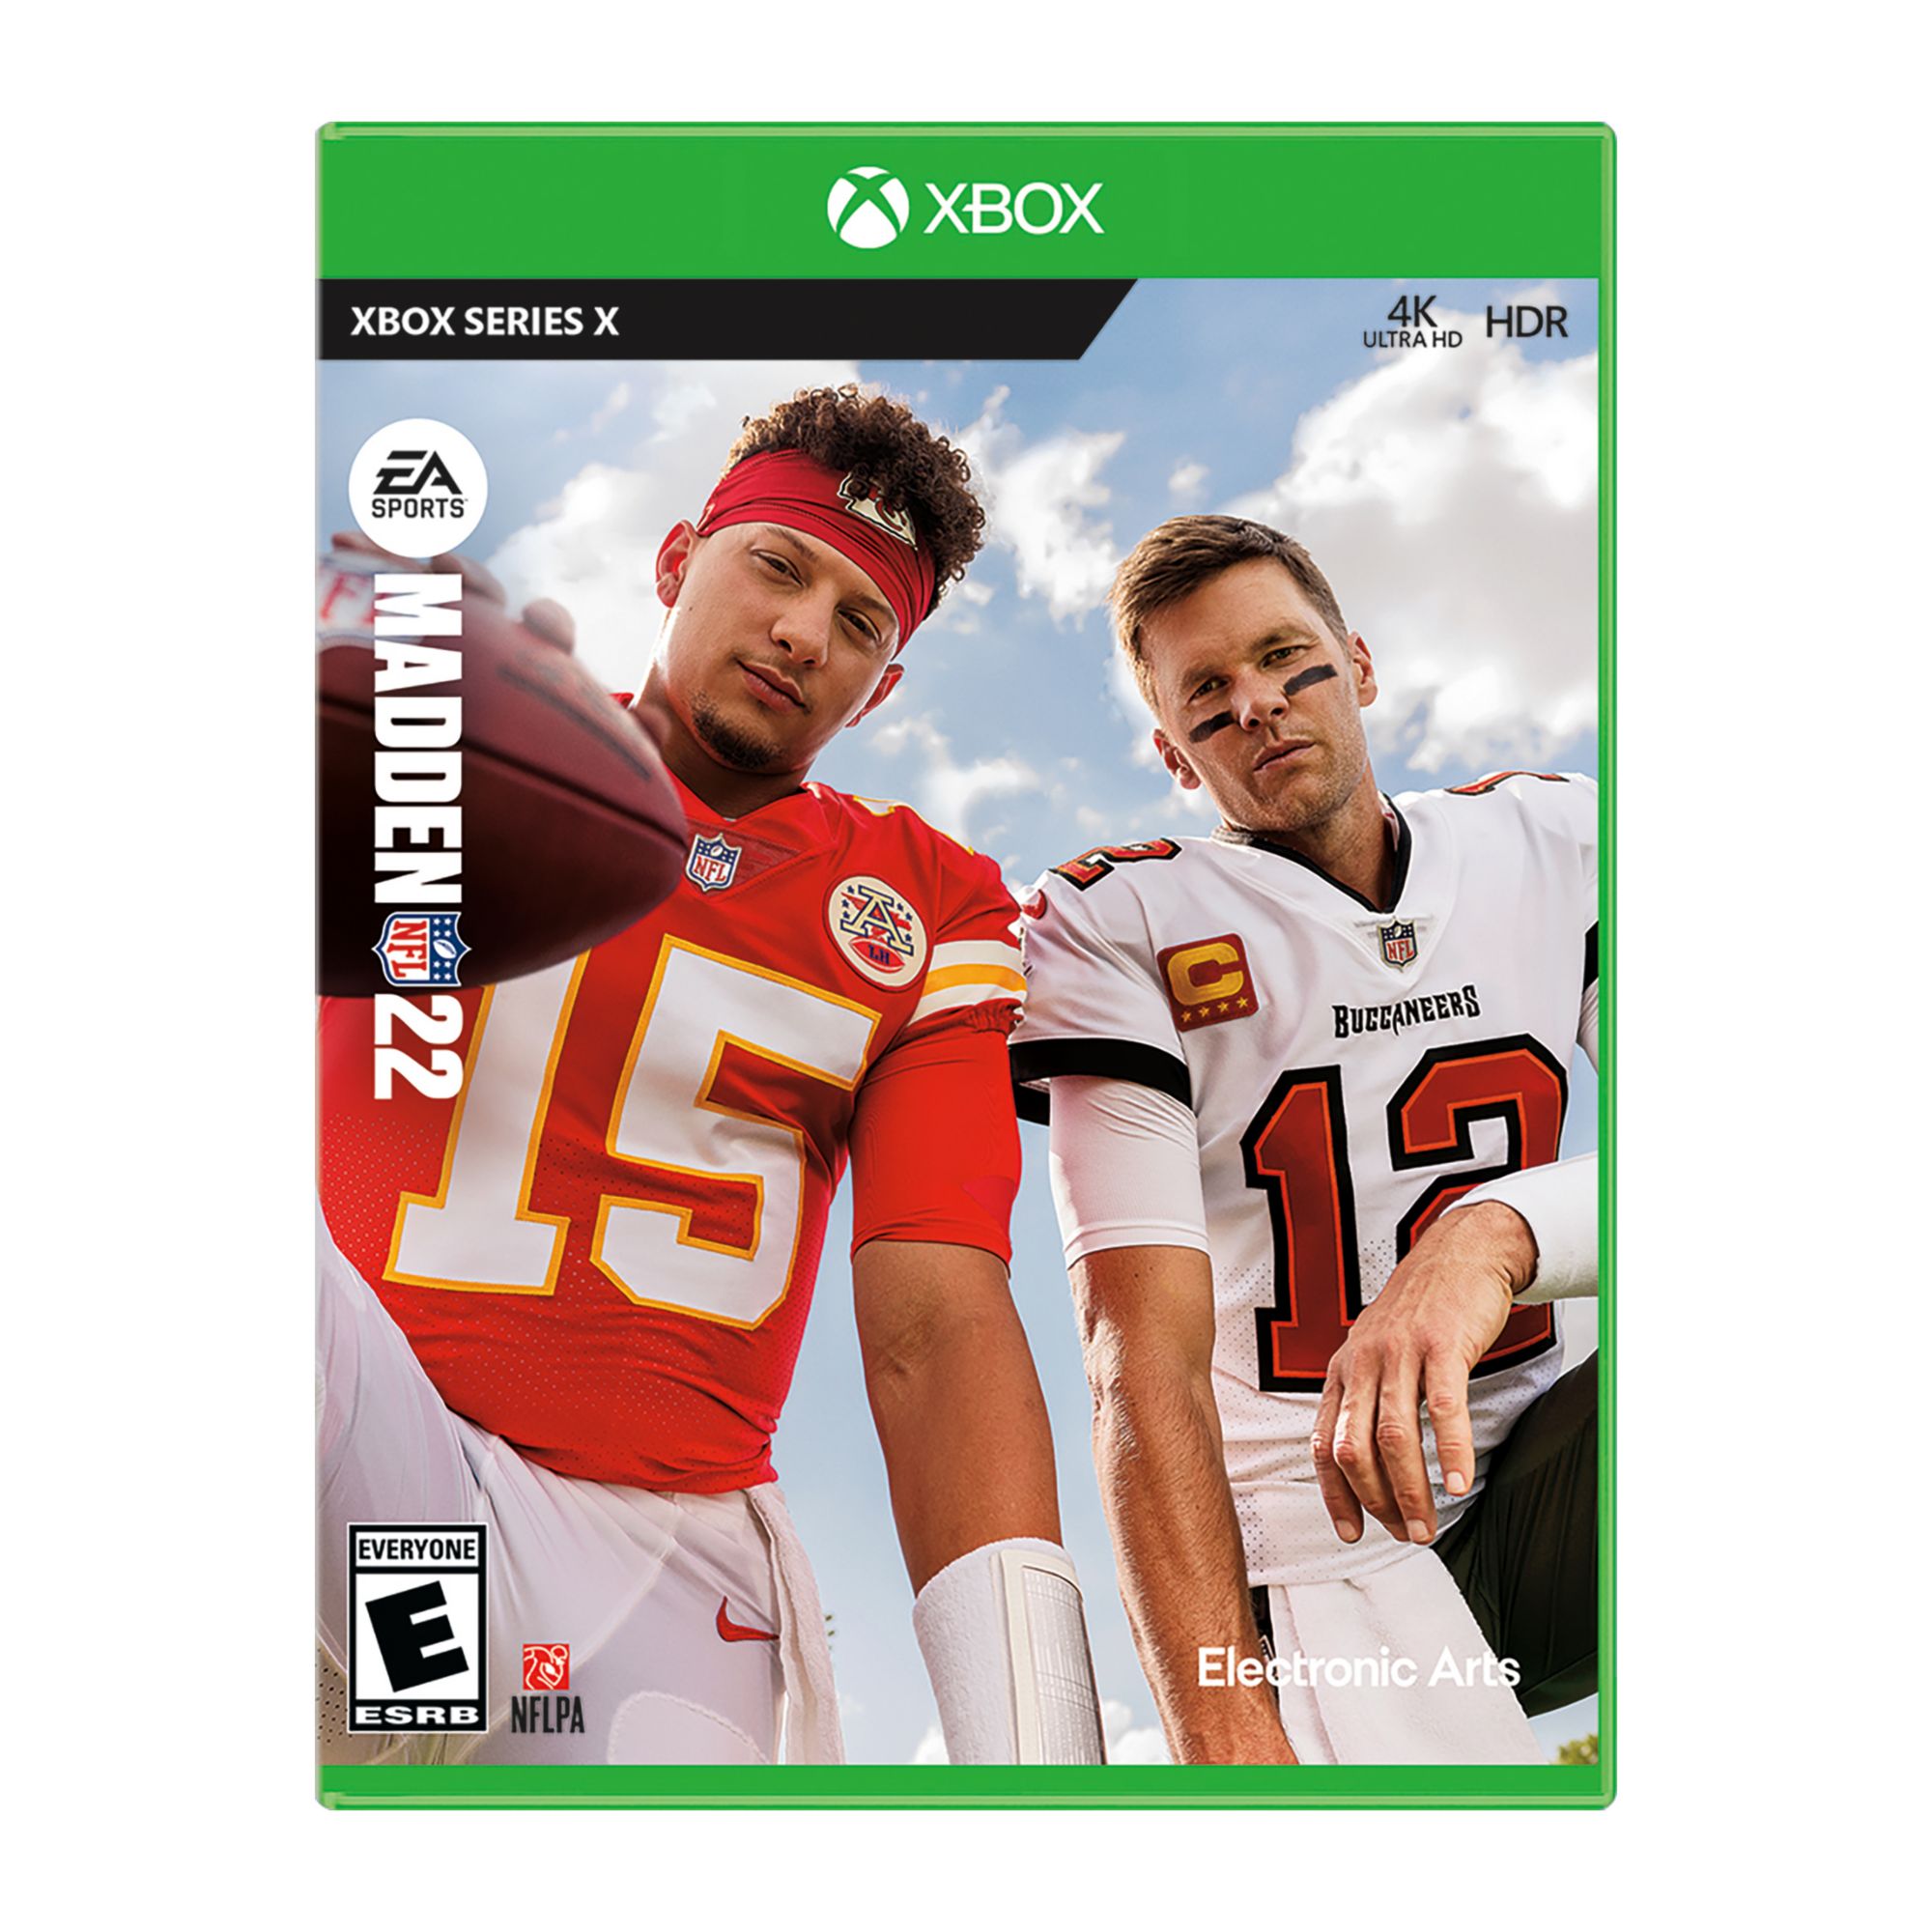 madden 22 sale ps5